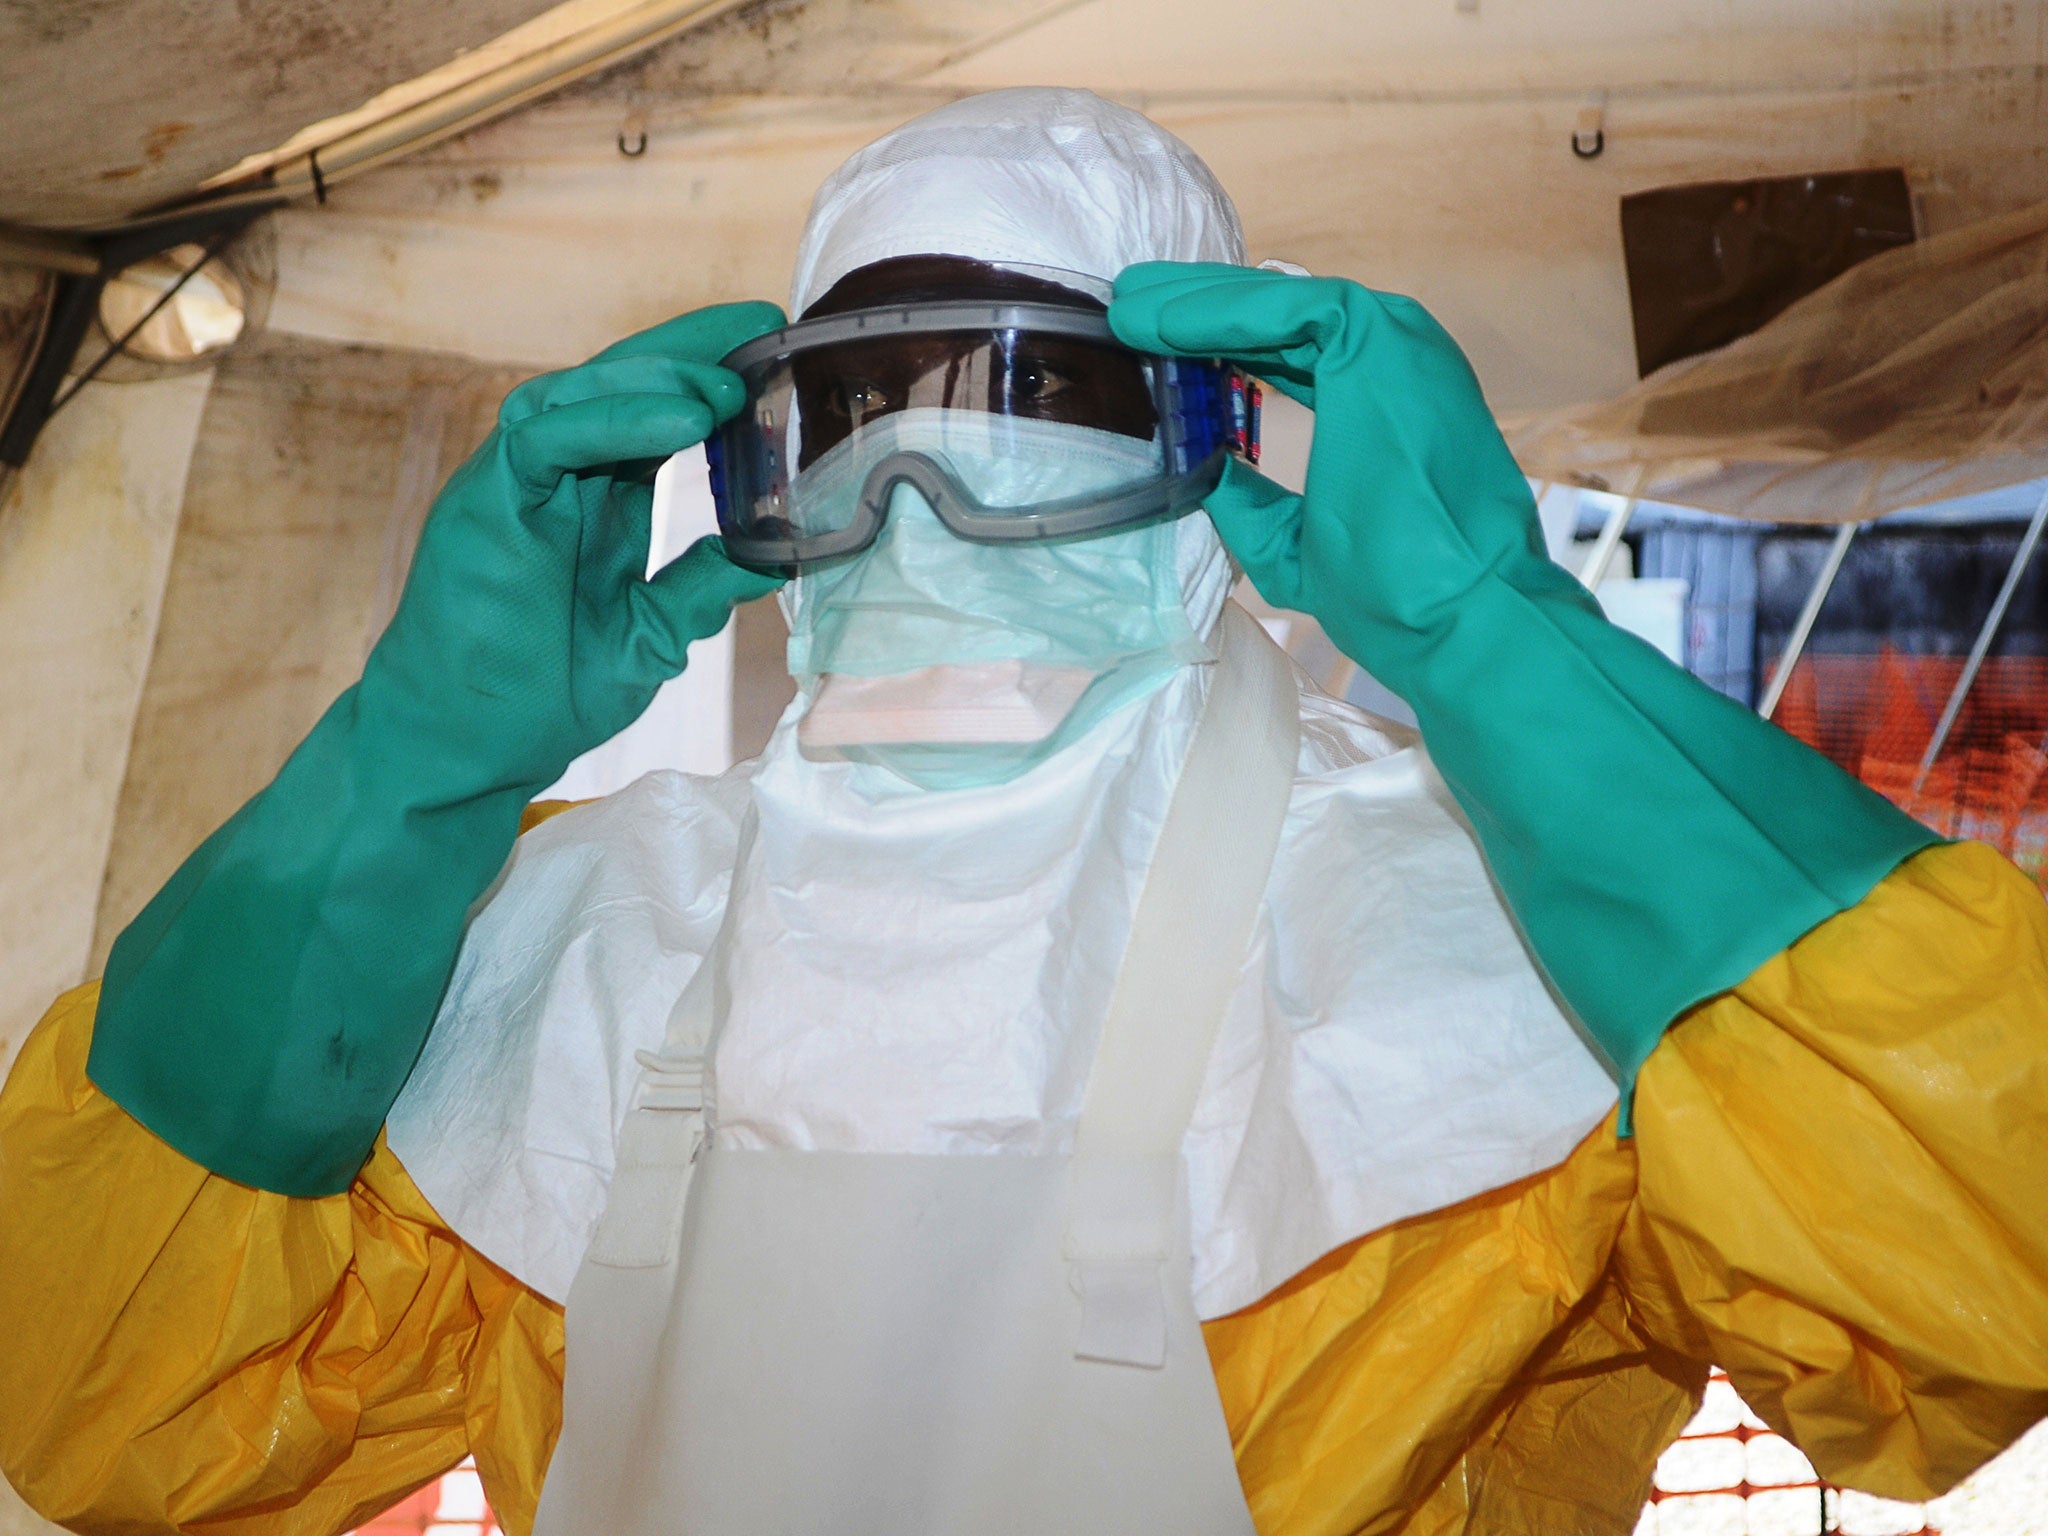 The World Health Organisation has warned that “drastic action” is now required to stem the Ebola outbreak